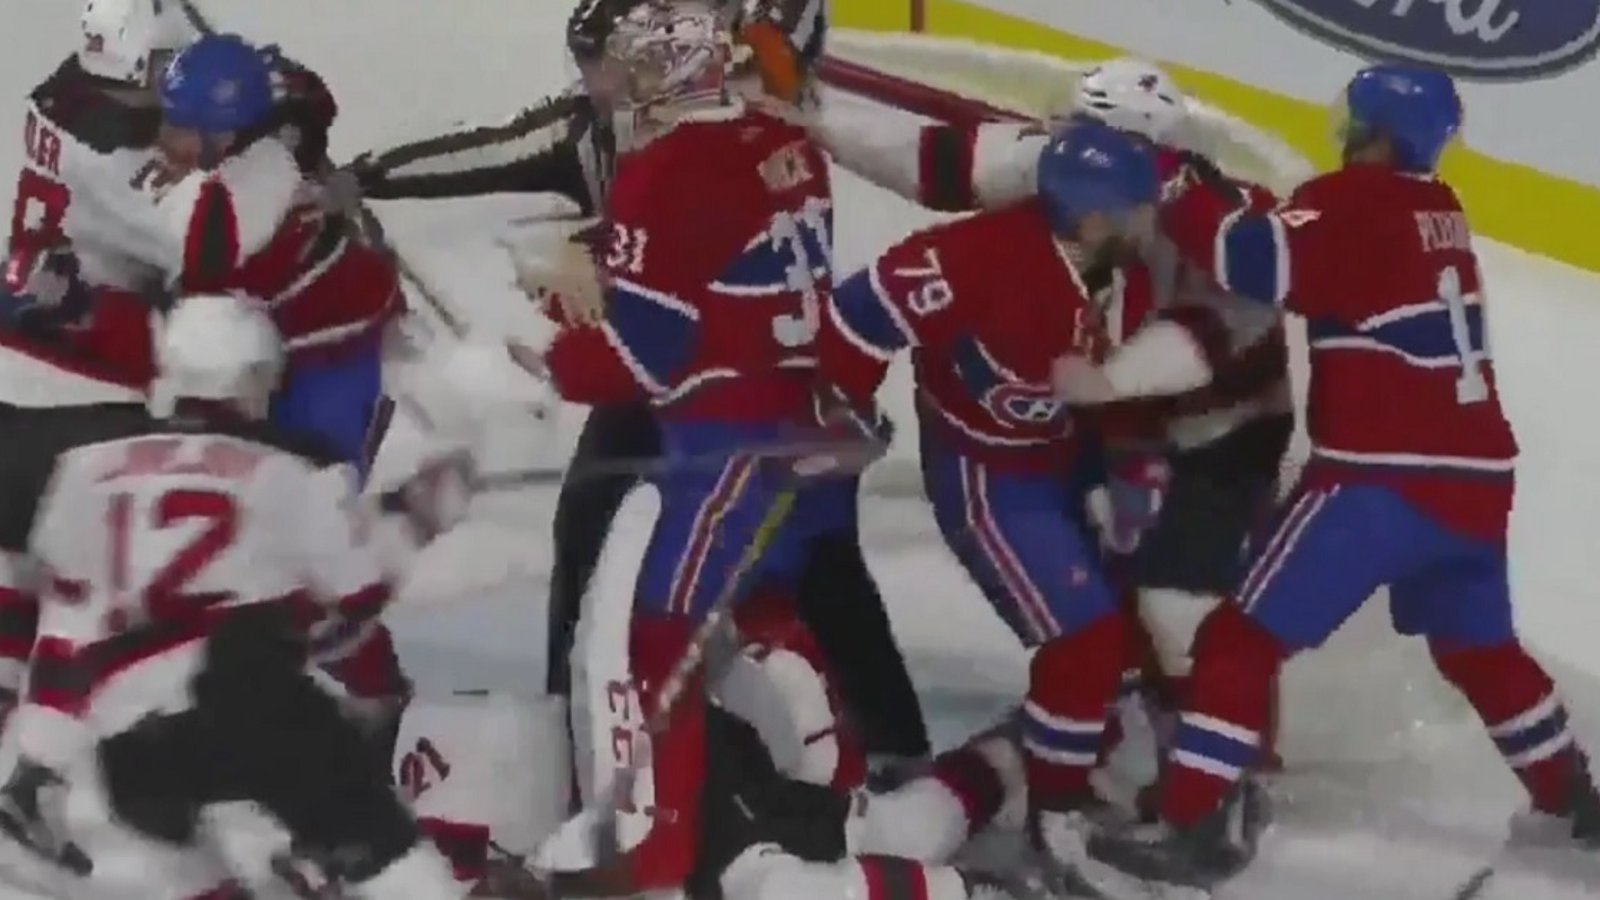 No hearing for Carey Price as some complain of preferential treatment.